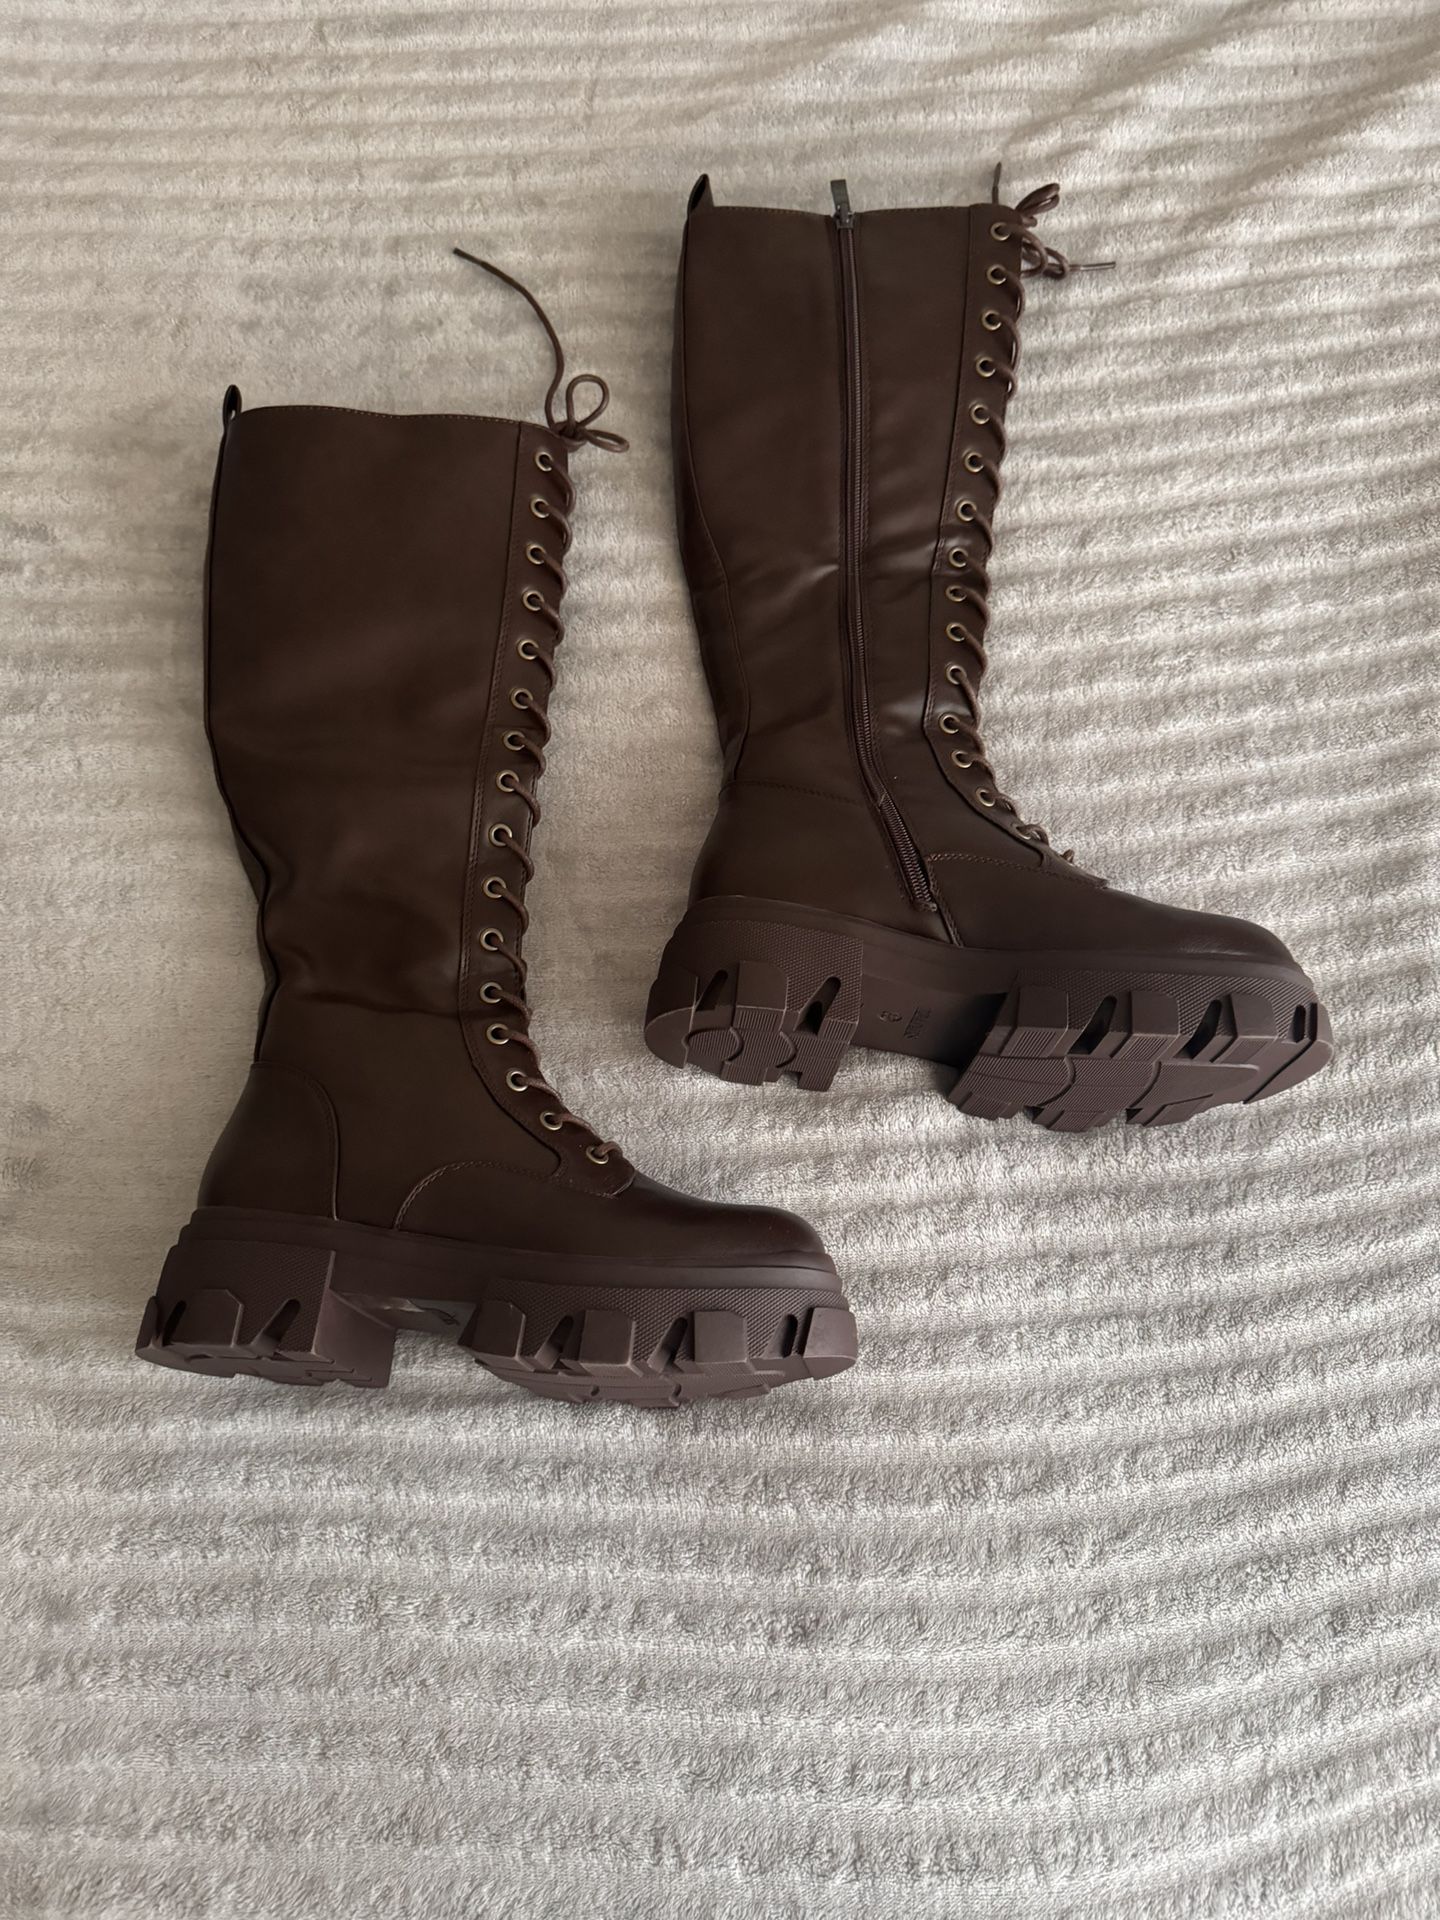 Women’s boots size 6 1/2 brand new